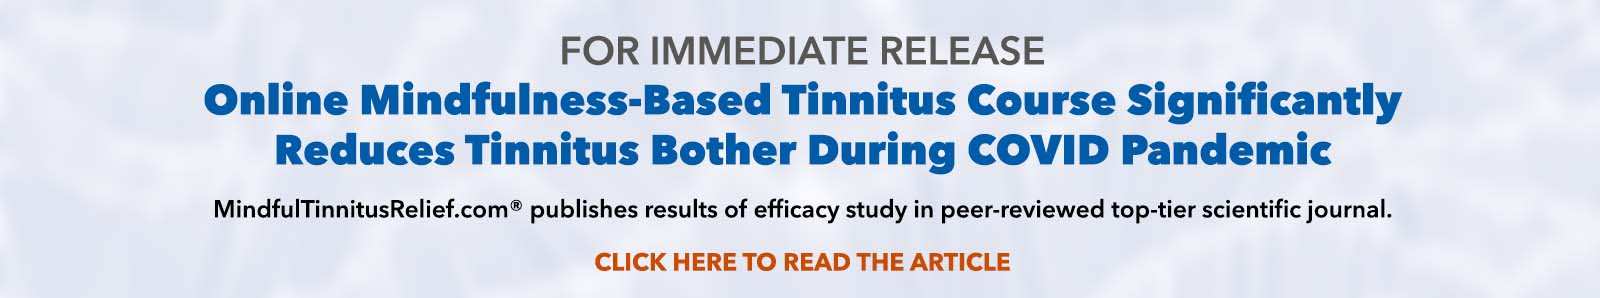 Online Mindfulness-Based Tinnitus Course Significantly Reduces Tinnitus Bother During  COVID Pandemic